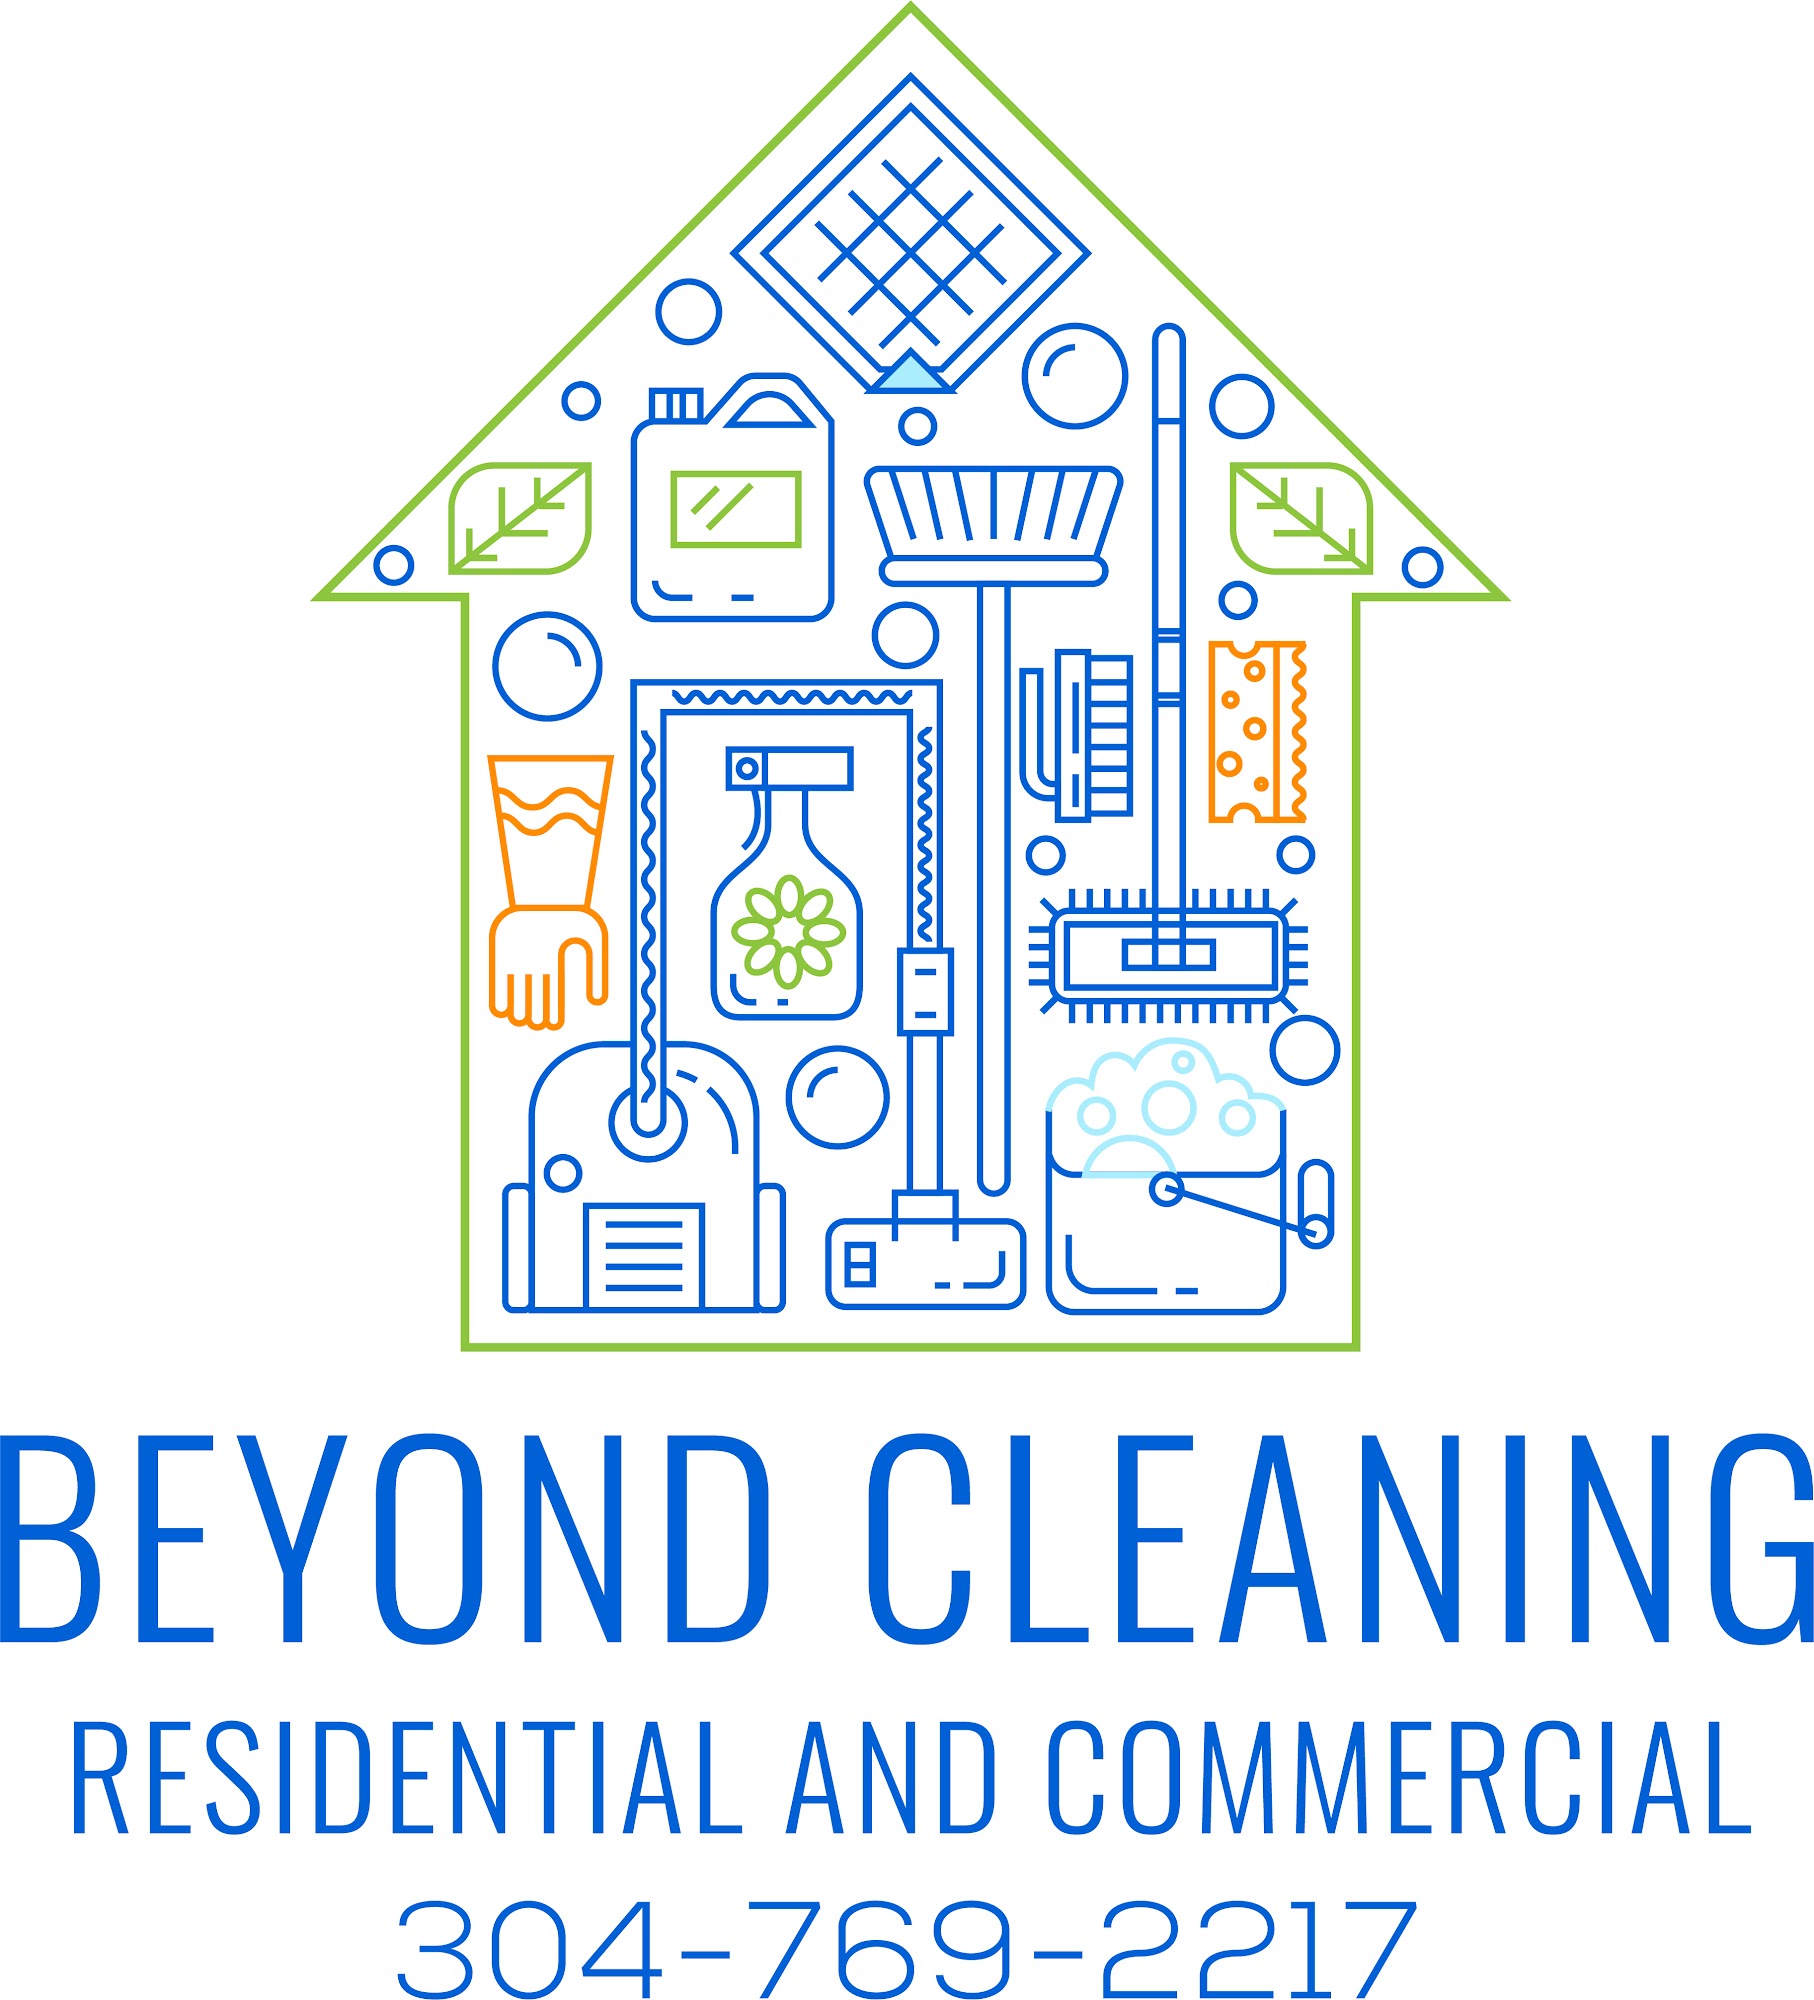 Beyond Cleaning